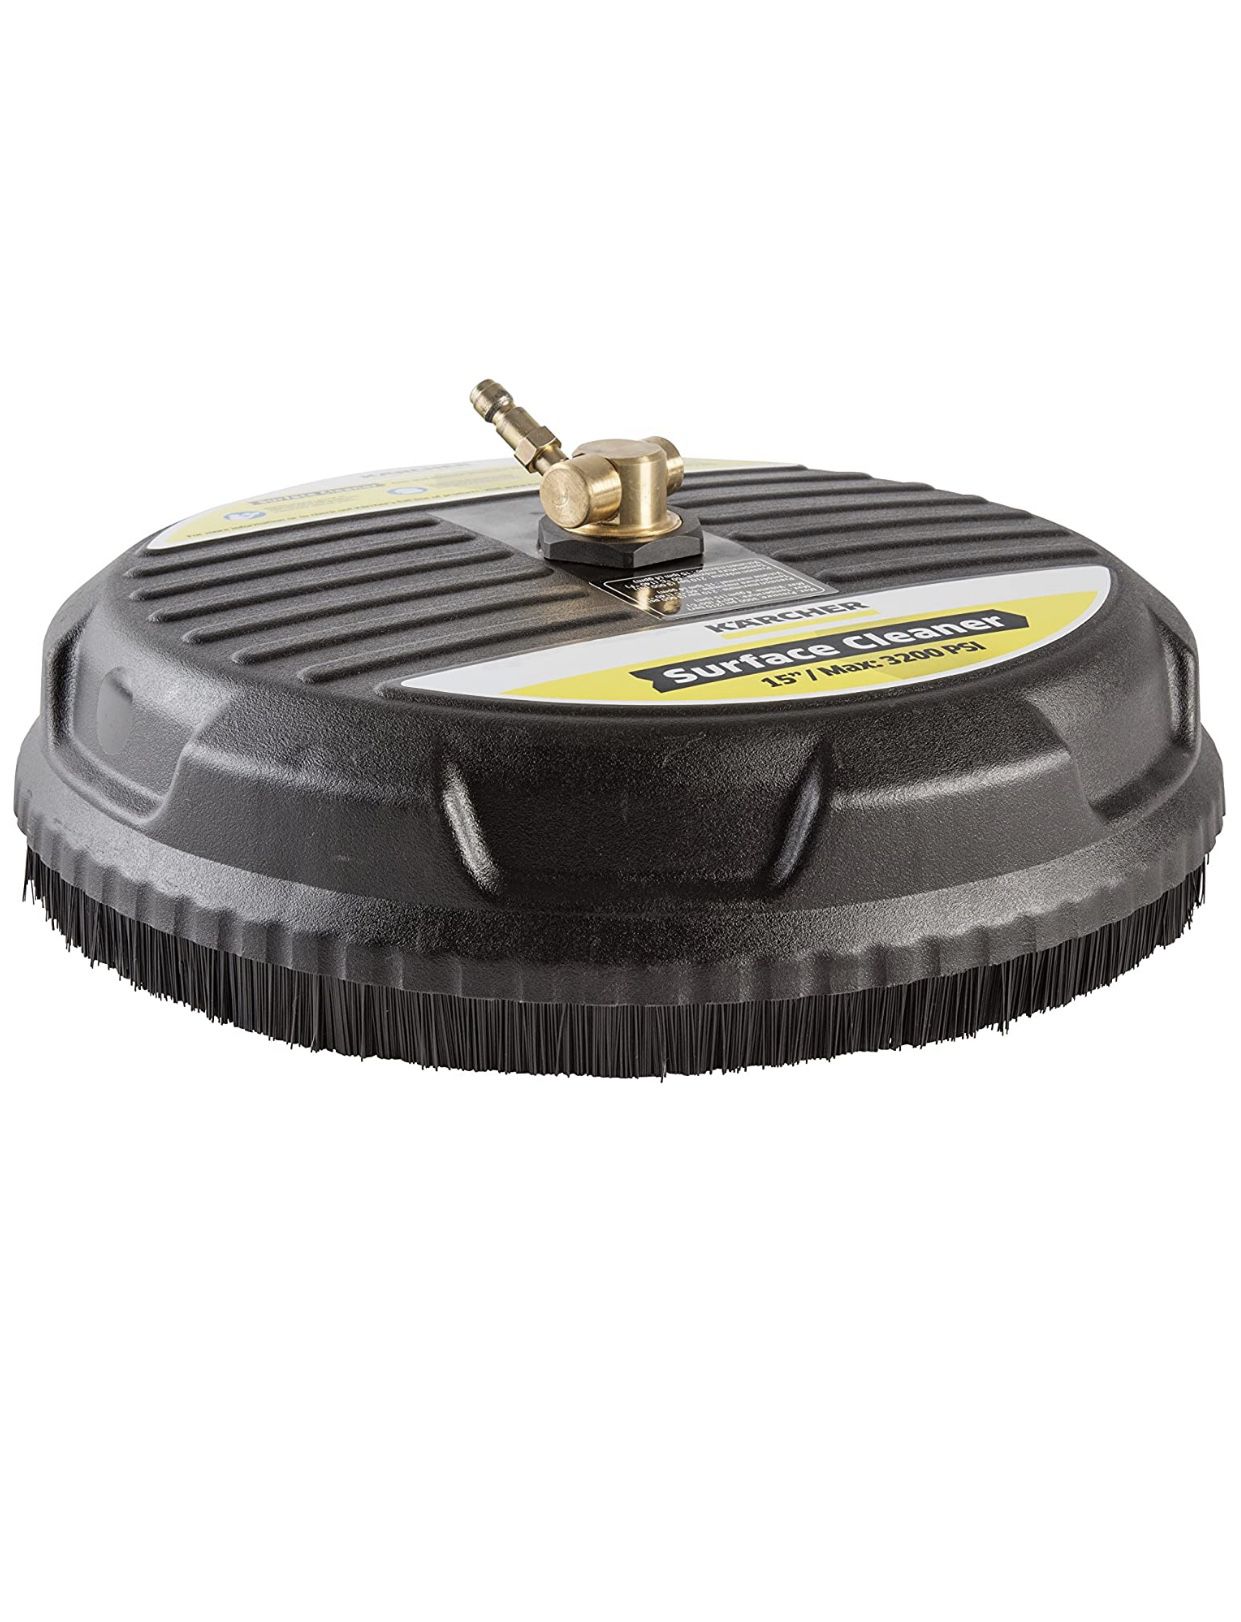 Karcher 15-Inch Pressure Washer Surface Cleaner Attachment 3200 PSI Rating